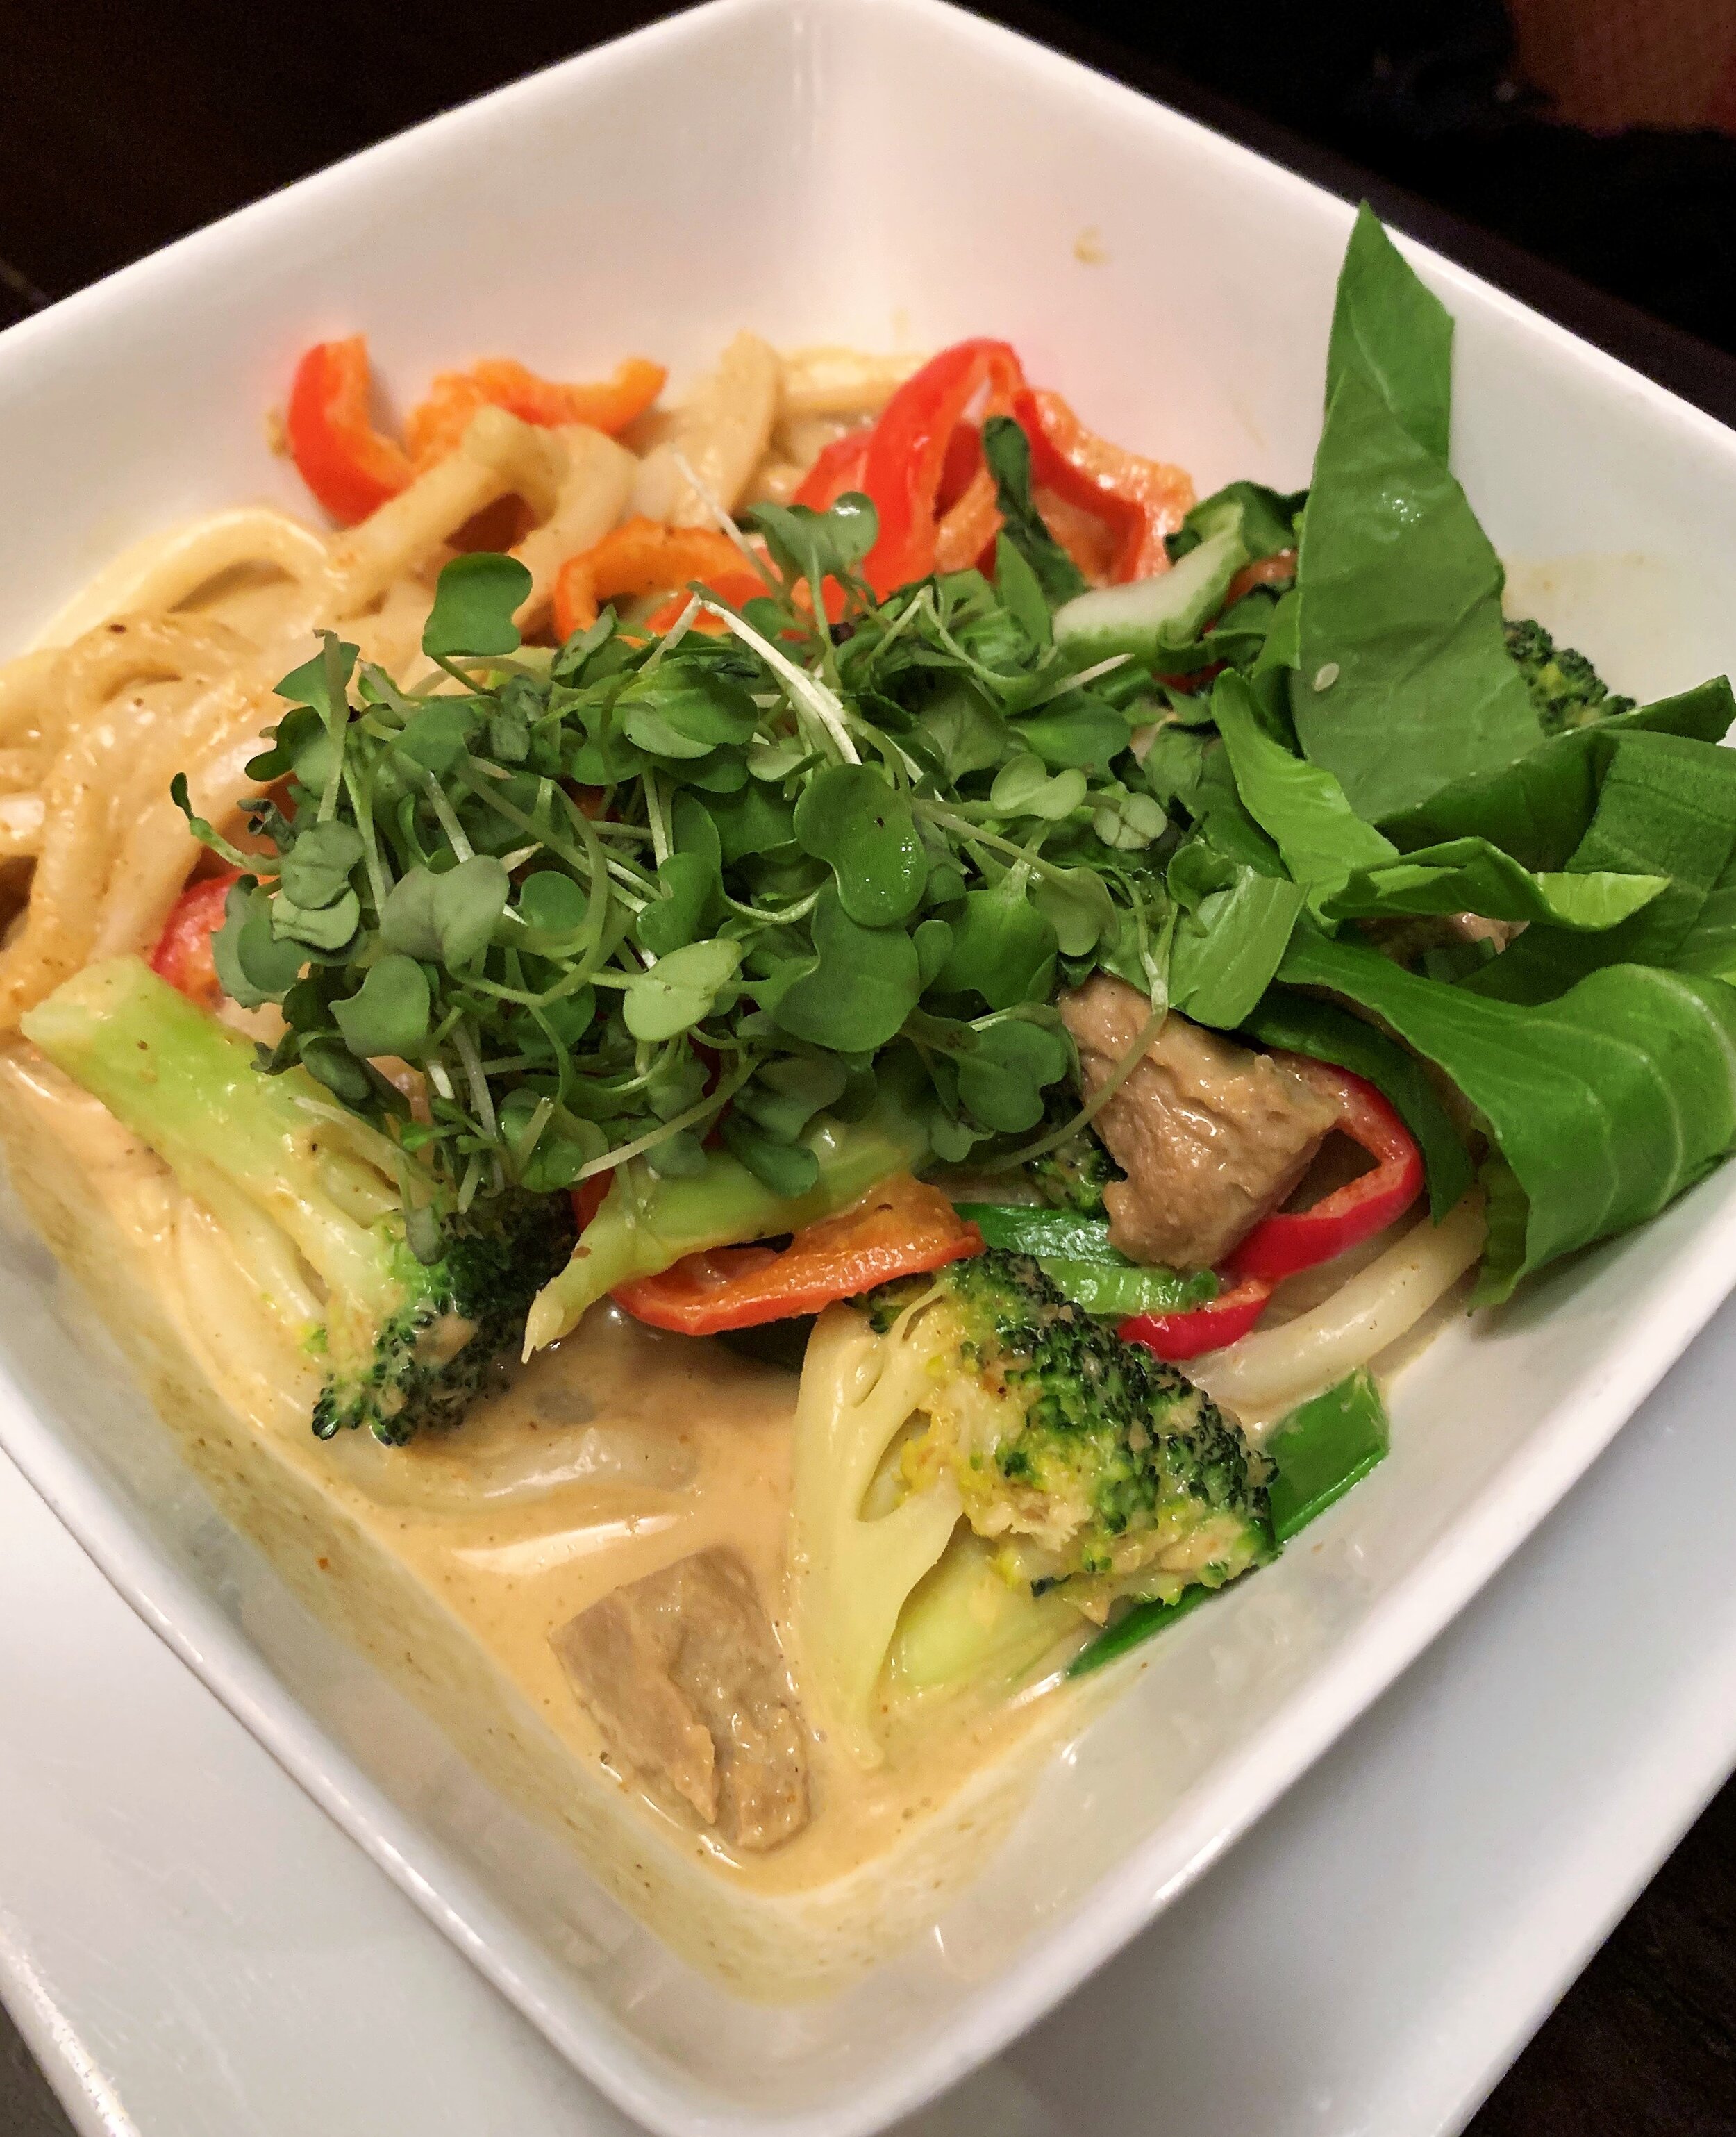 Yellow curry with udon noodles, veggies, and mock duck at Ginger Hop in northeast Minneapolis